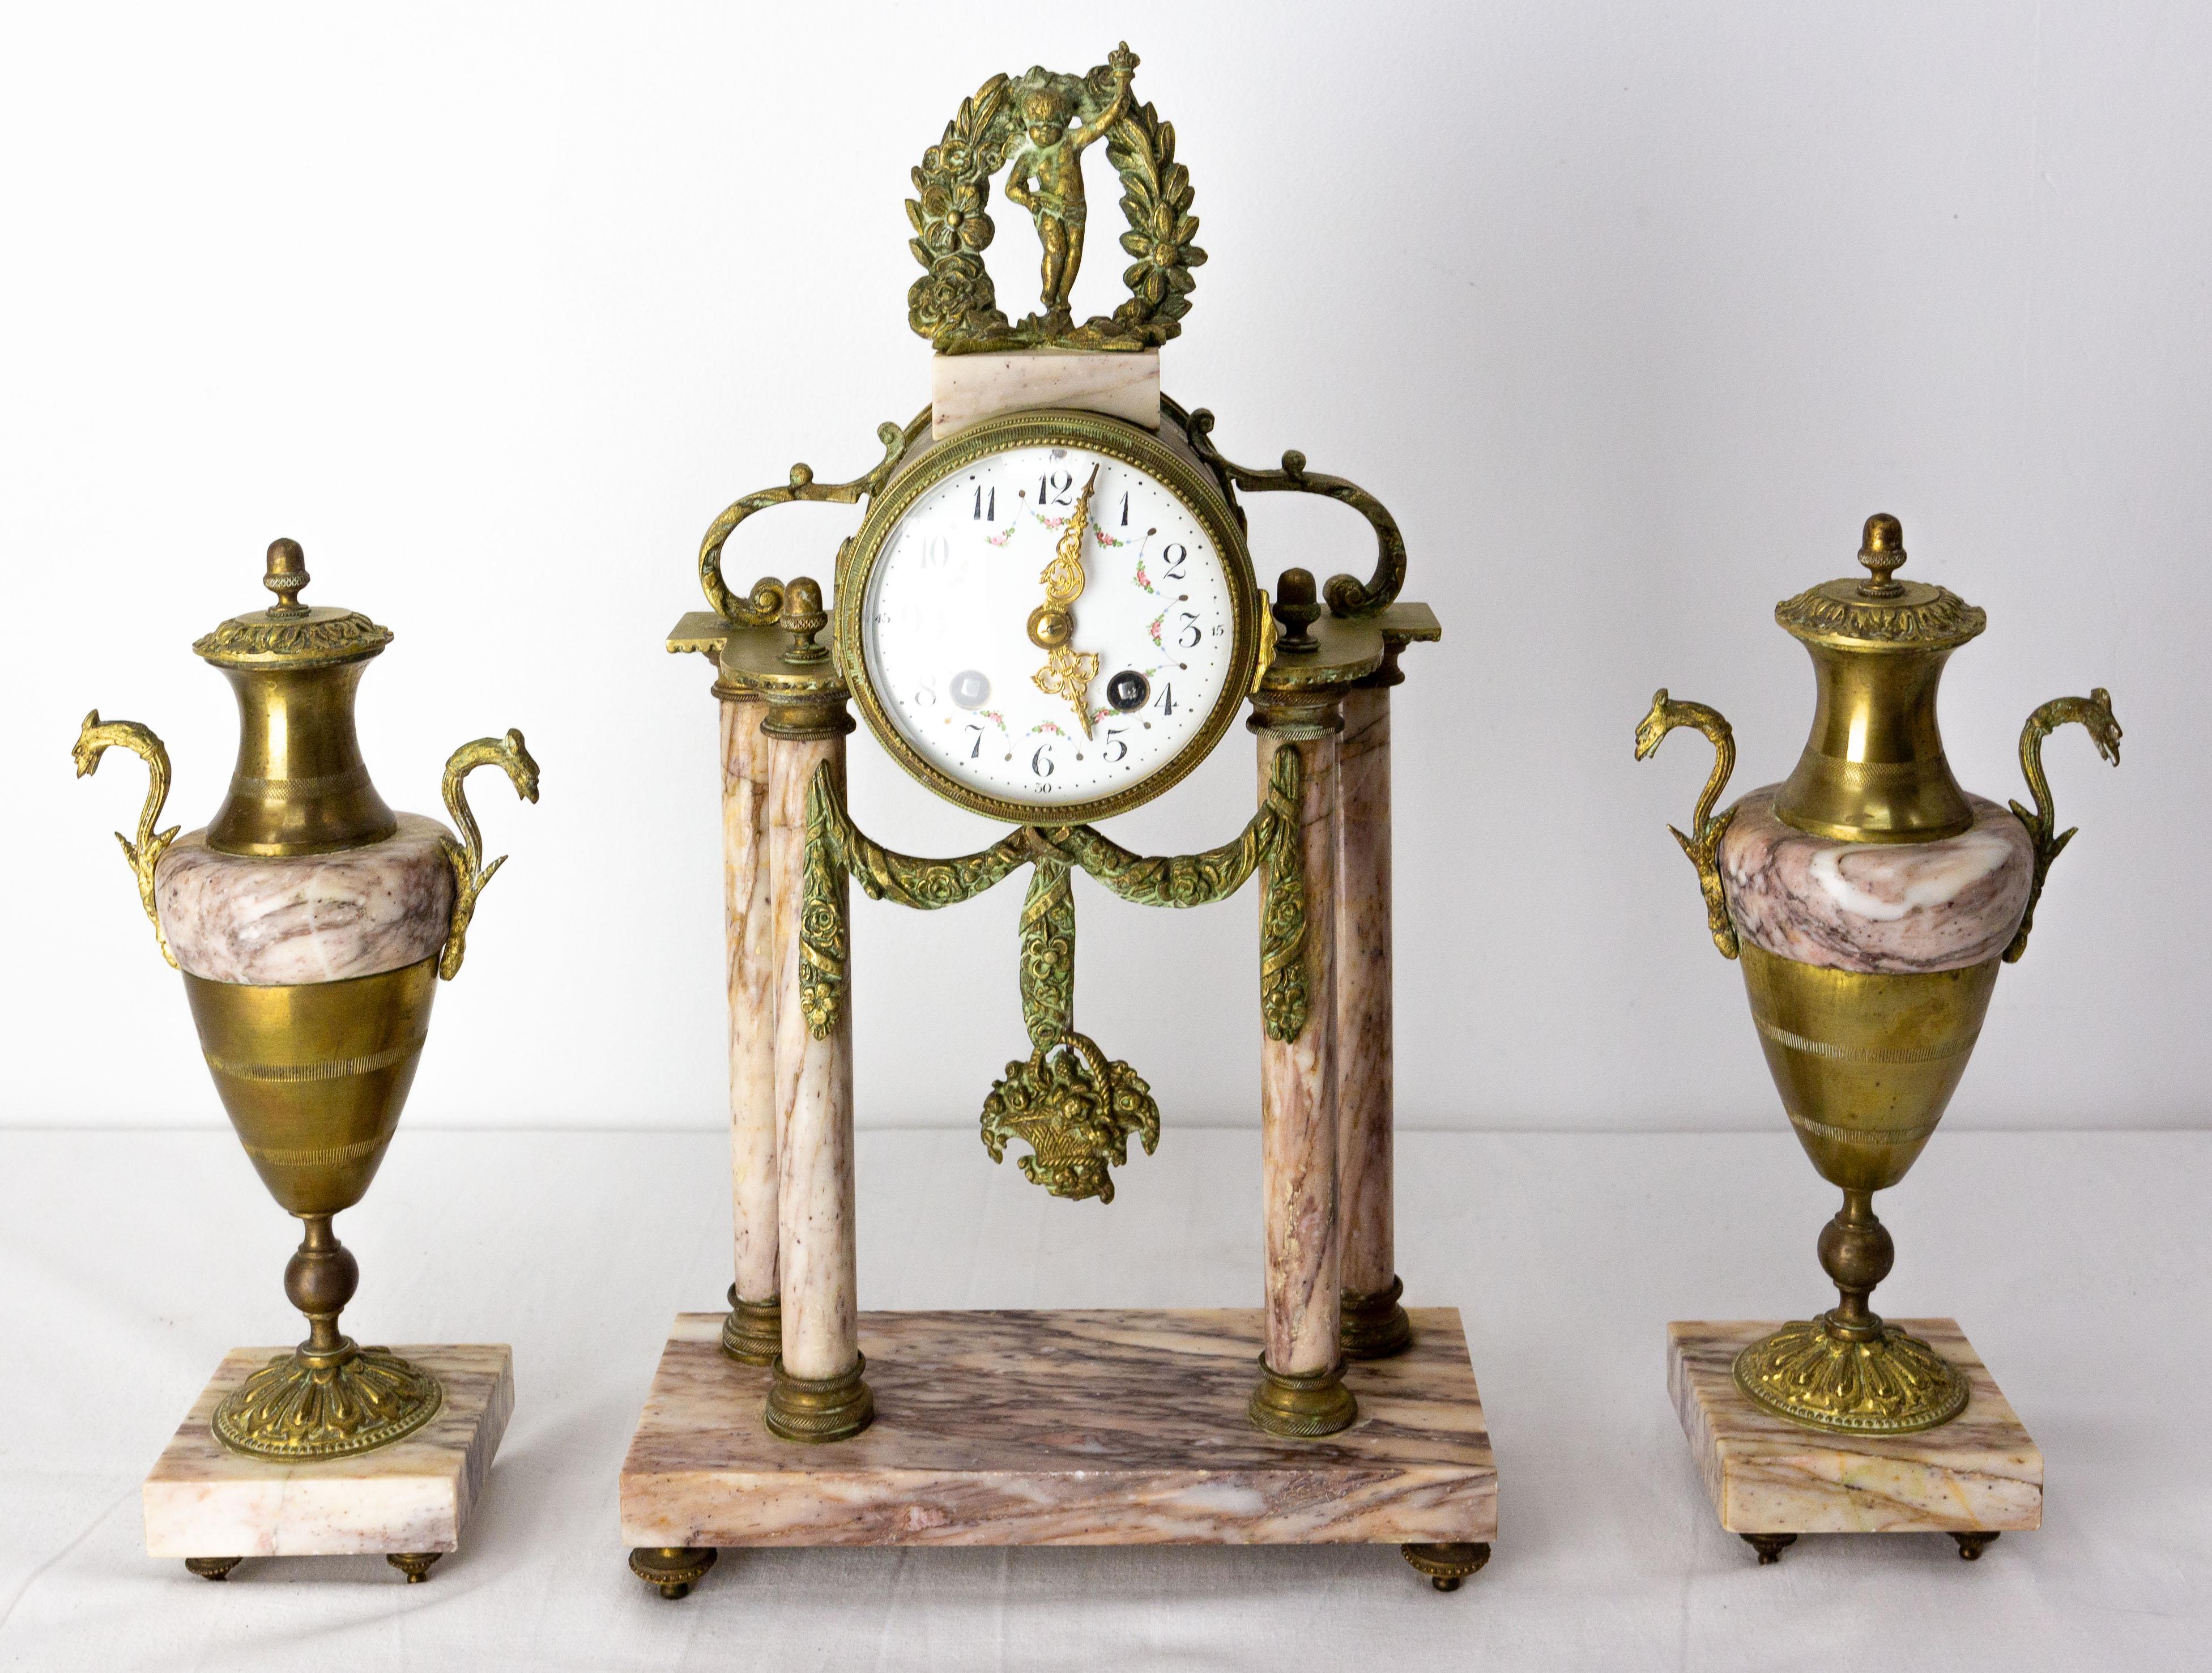 Napoleon III French gilded bronze mantel clock with putti cherub on the top of the clock late 19th century circa 1890.
Set of a clock and two amphoras.
Pendulum in the shape of a flower basket

The French movement of the clock will be checked